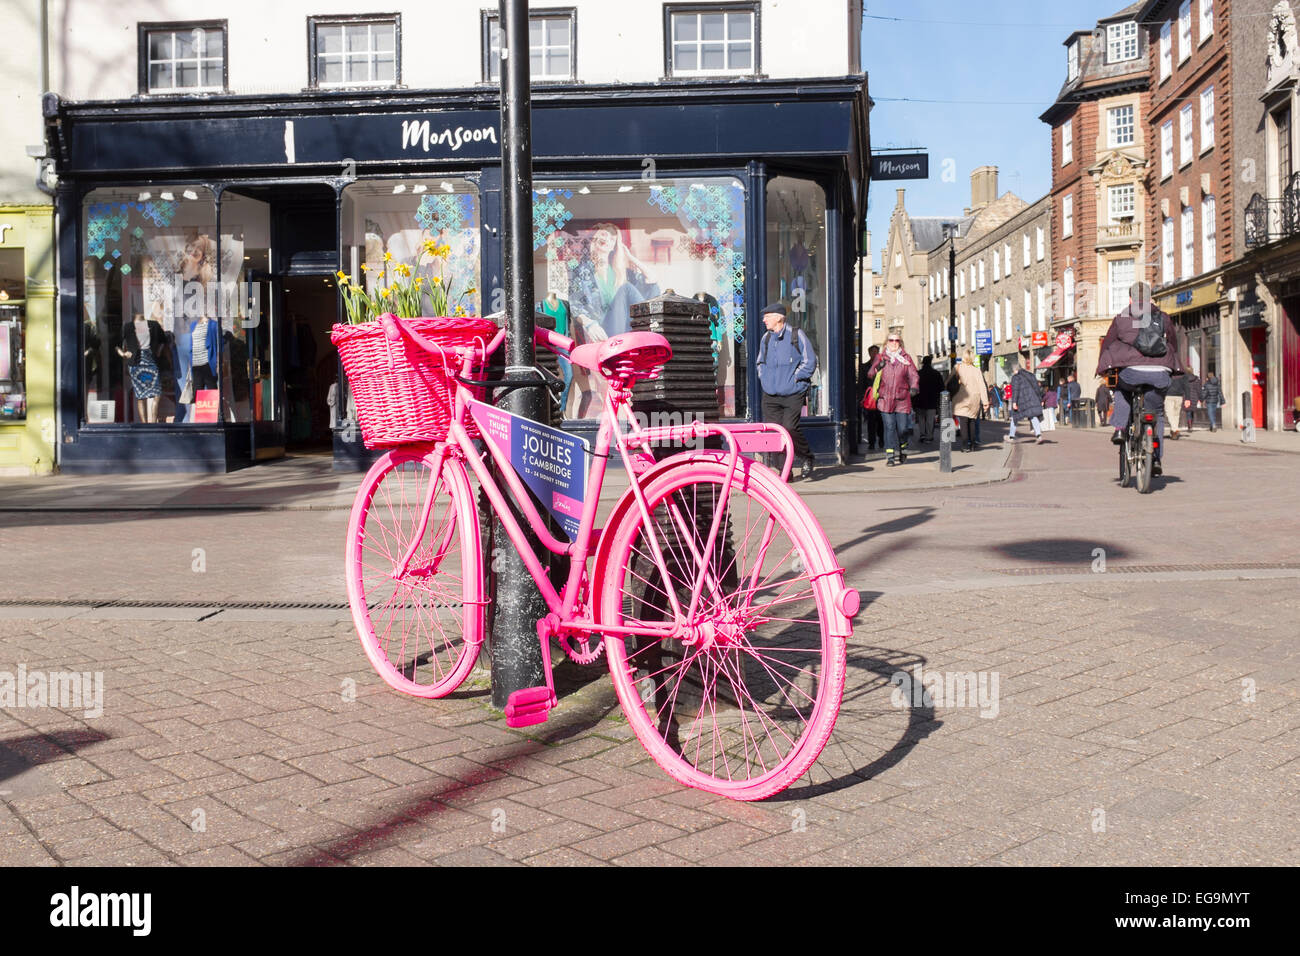 Advertising sign on parked pink bicycle Sidney Street Market Hill junction Cambridge Cambridgeshire England Stock Photo